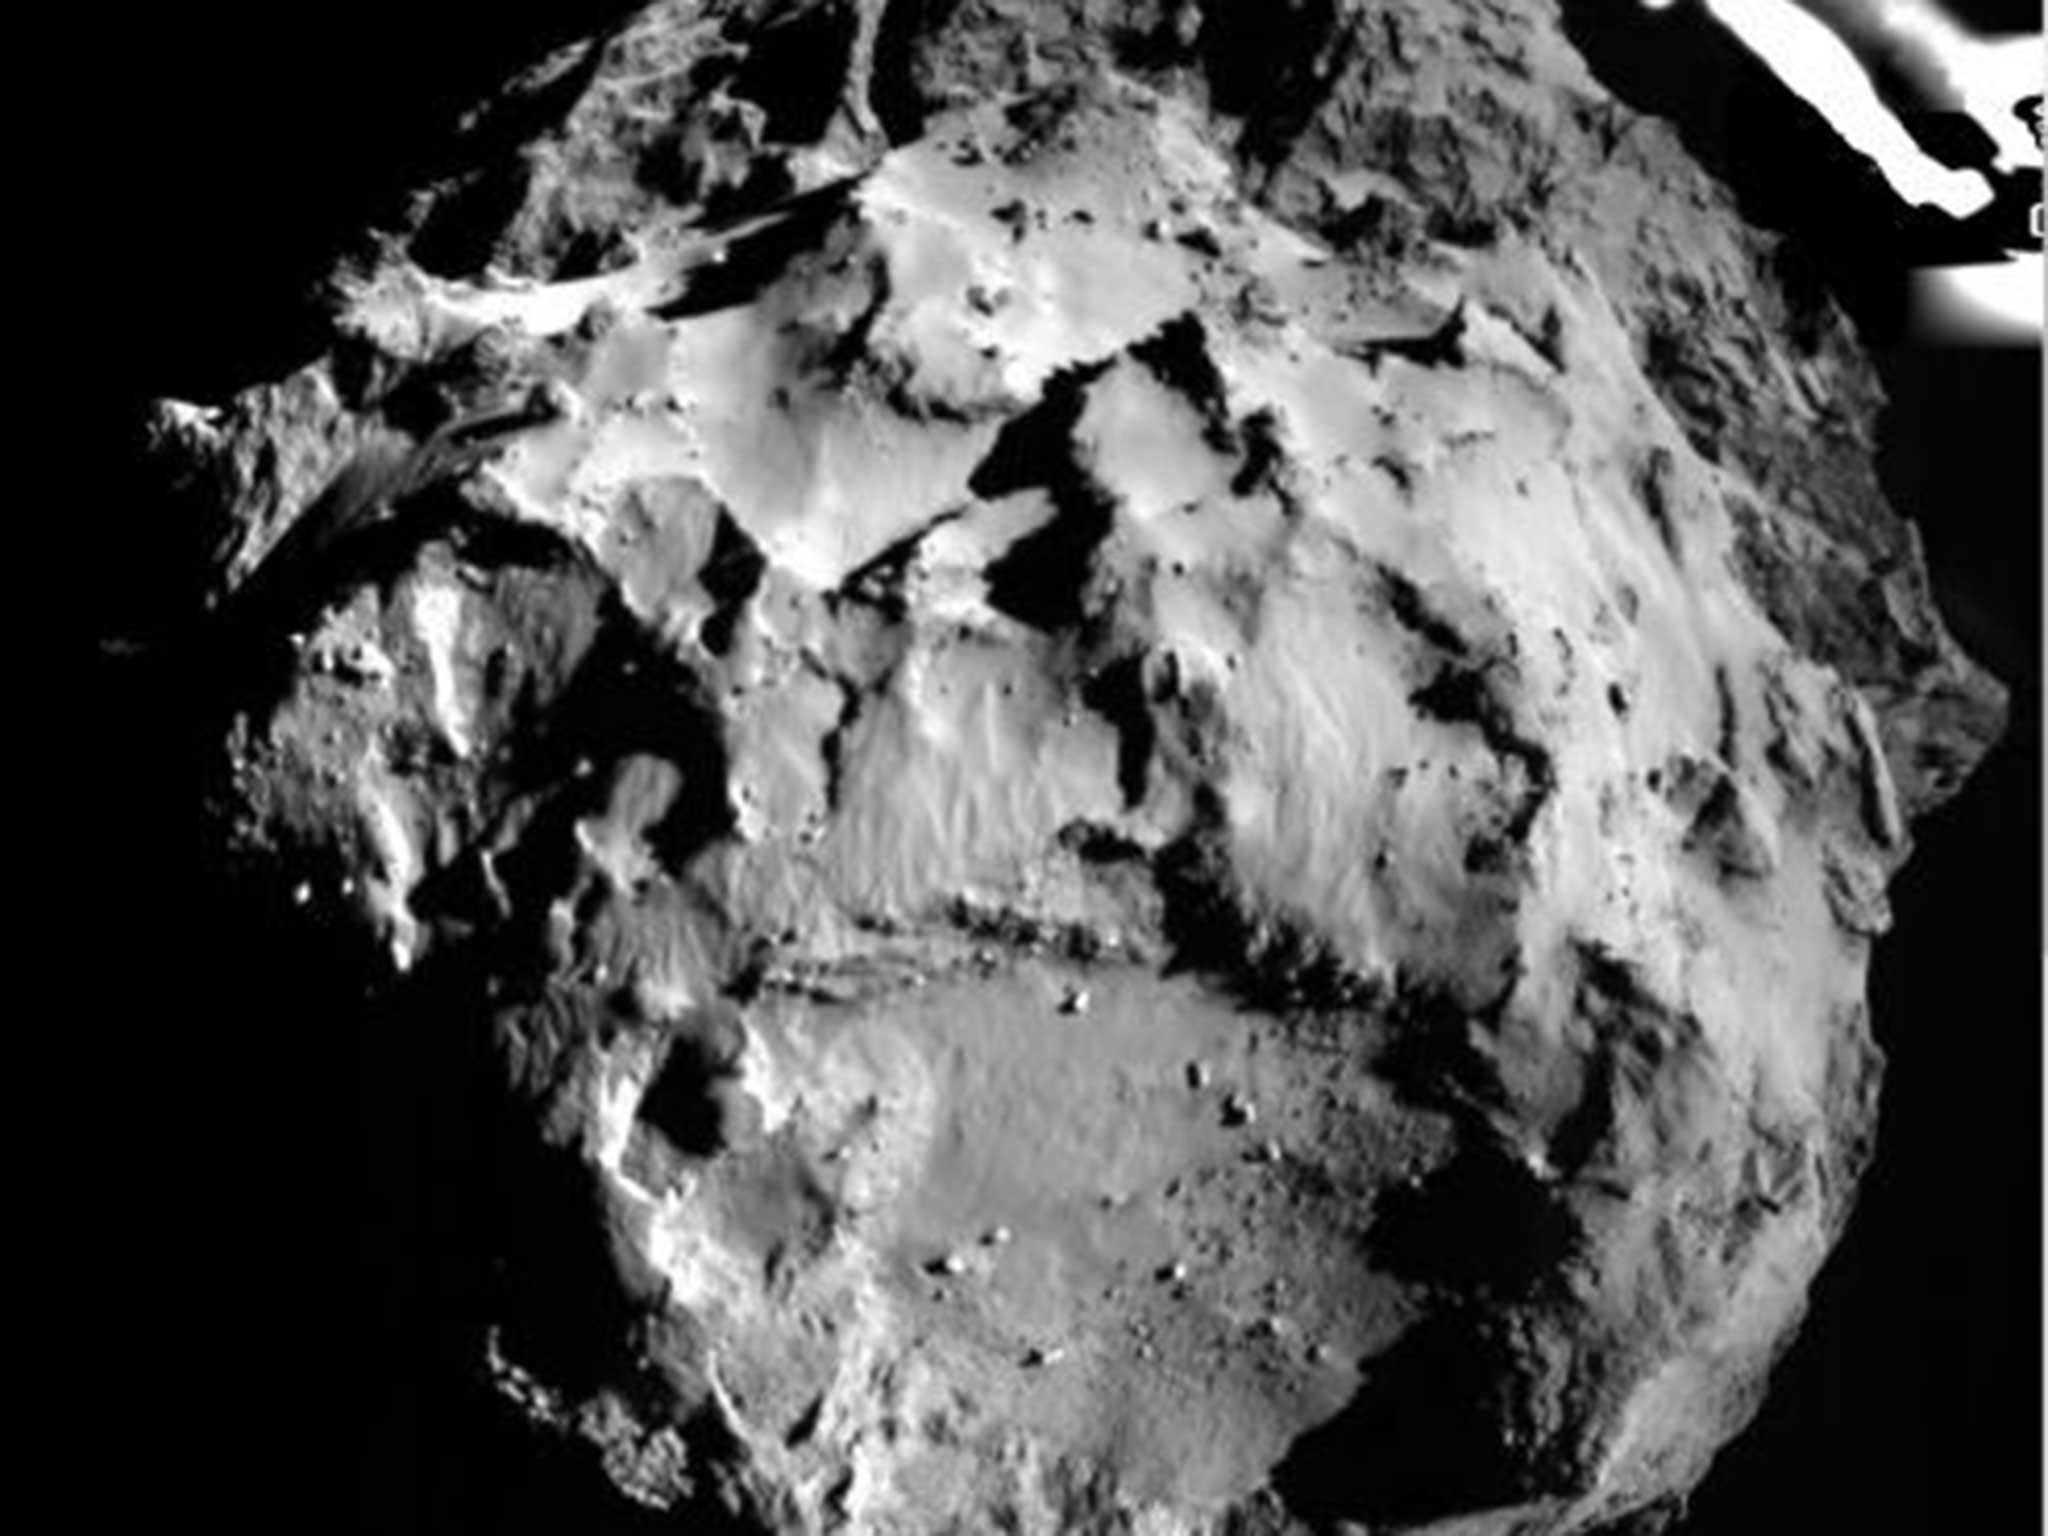 The 67P/CG comet as seen from the Philae lander